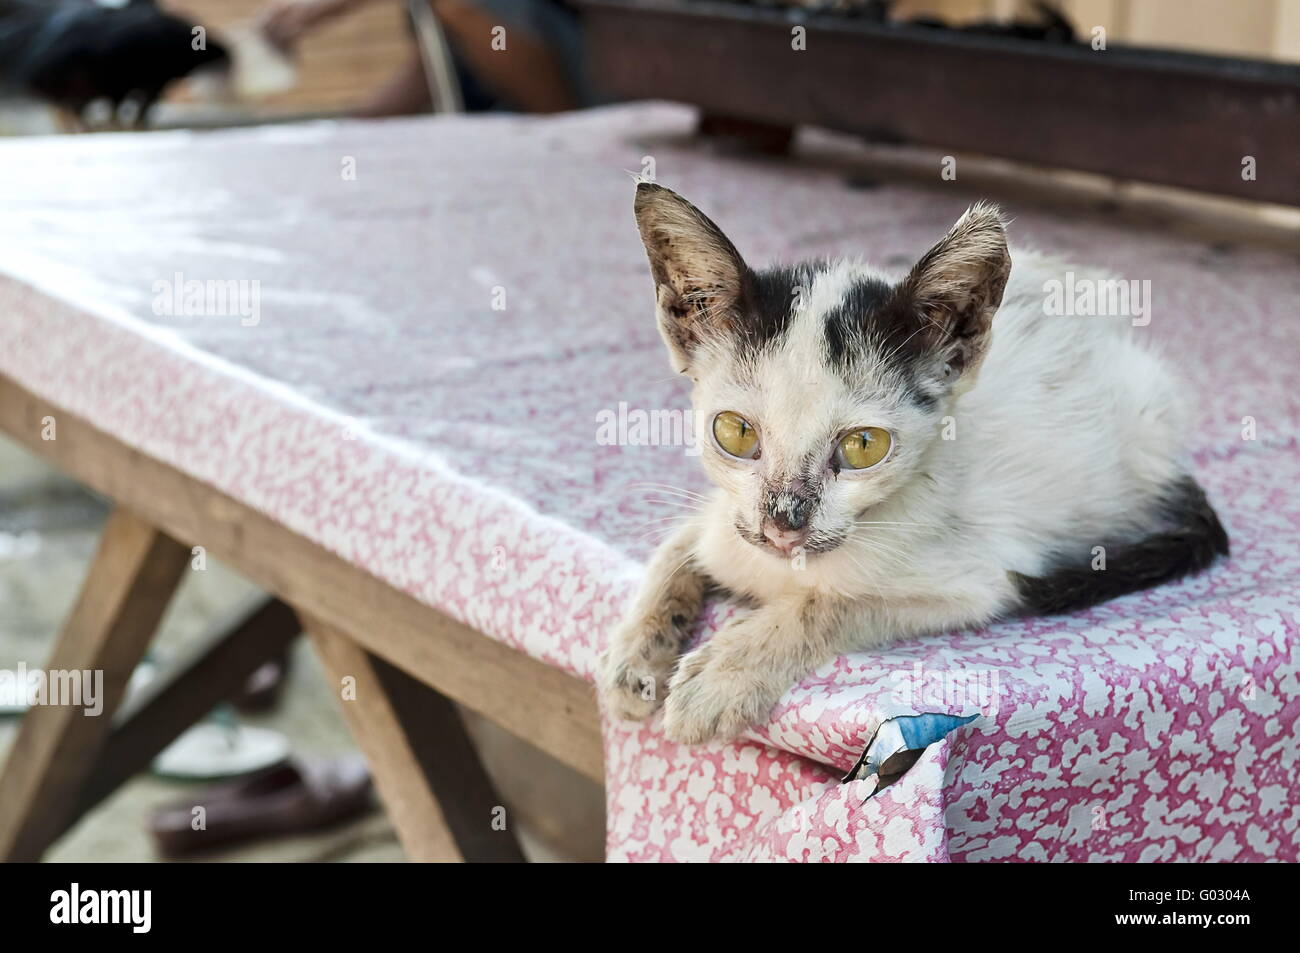 Little sick cat on a table watching me in Jakarta street Stock Photo